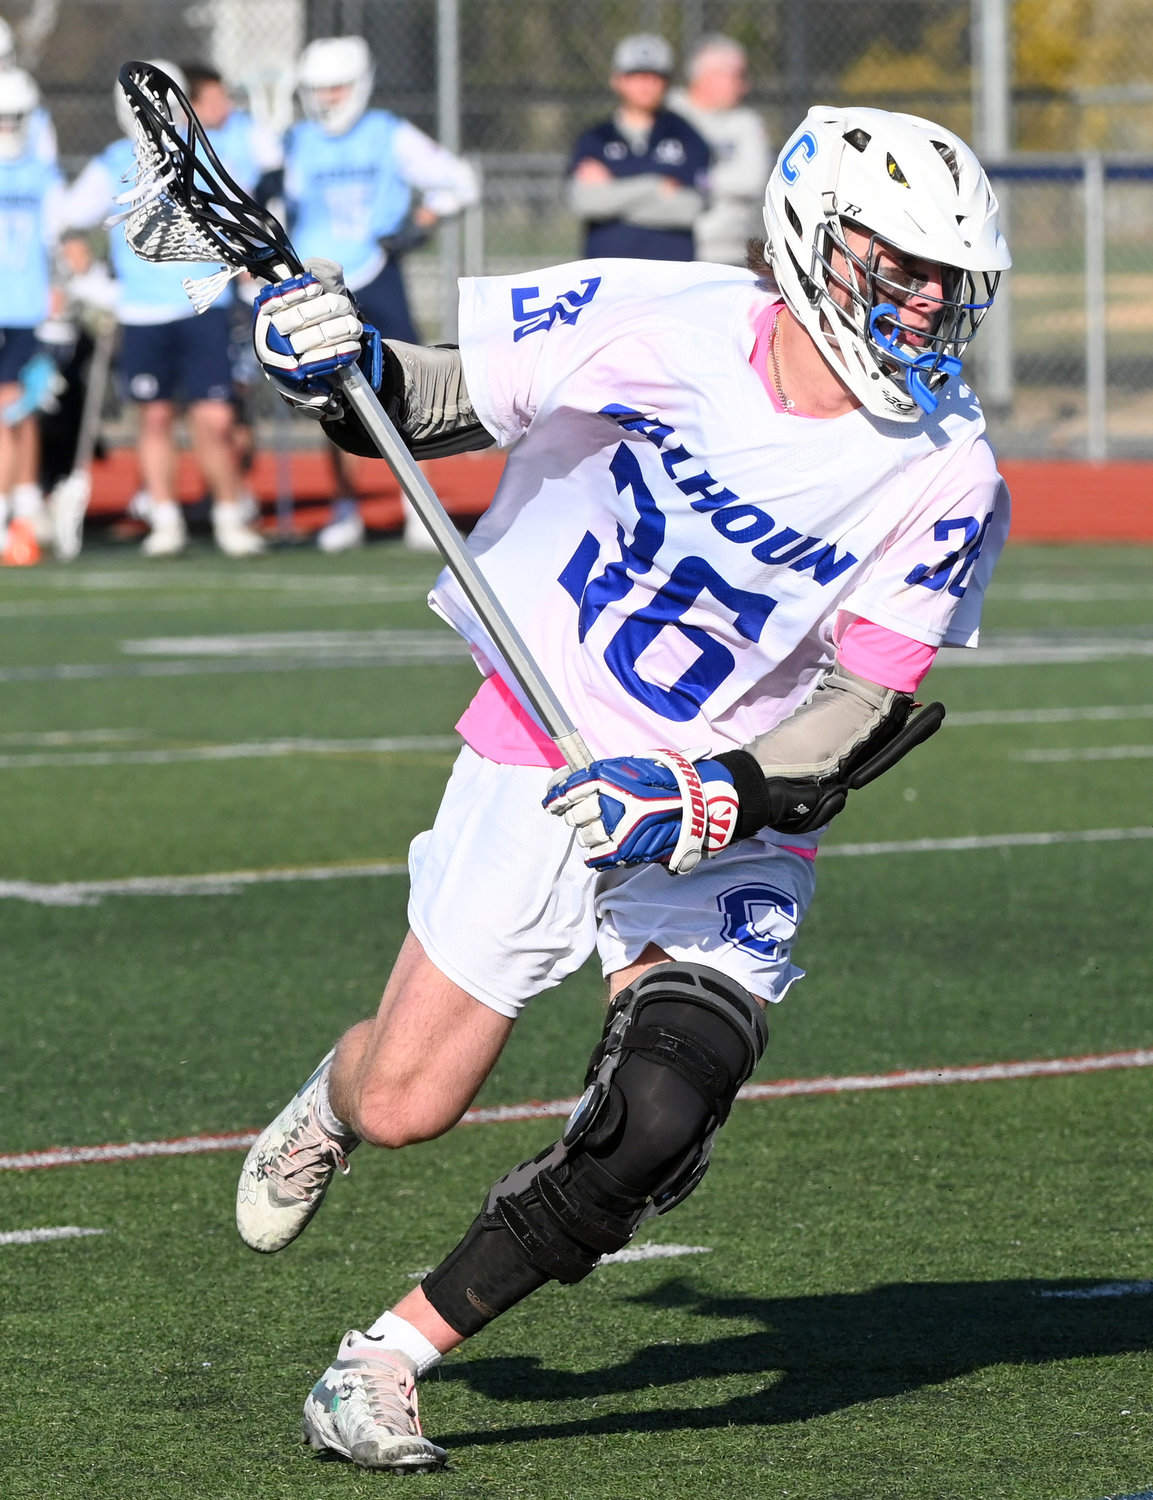 Junior Jake Lewis scored twice and assisted on two other goals to help lead the Colts over Carey last Friday, 11-8.